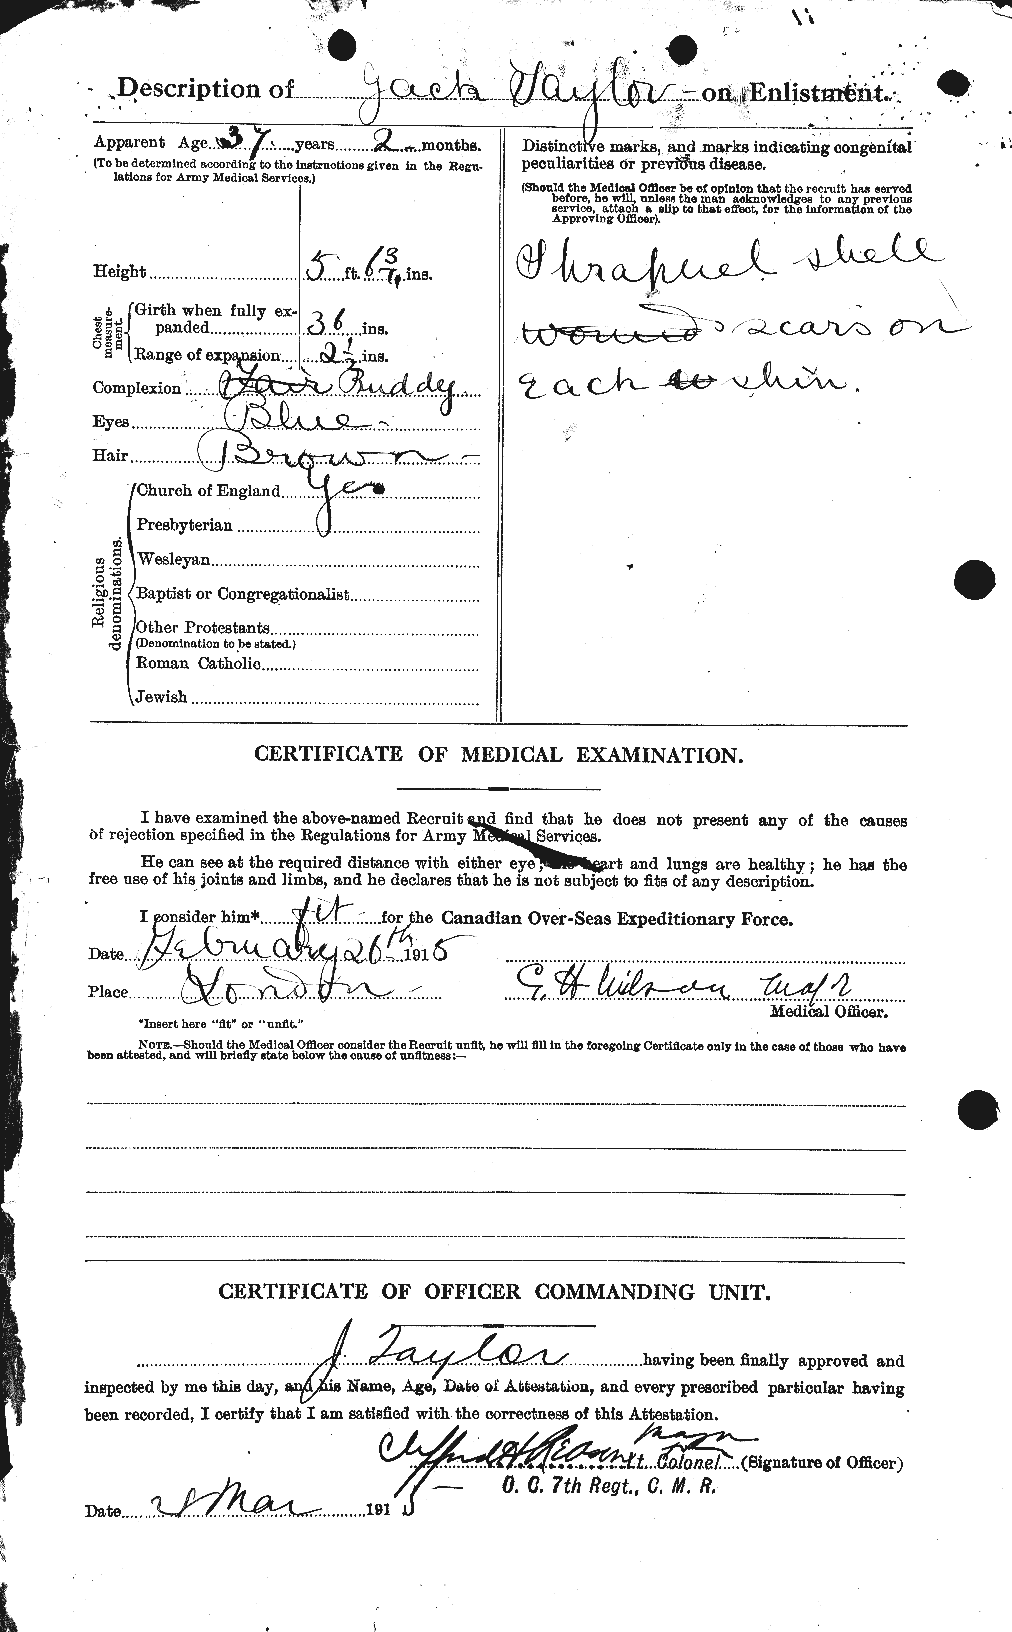 Personnel Records of the First World War - CEF 626640b